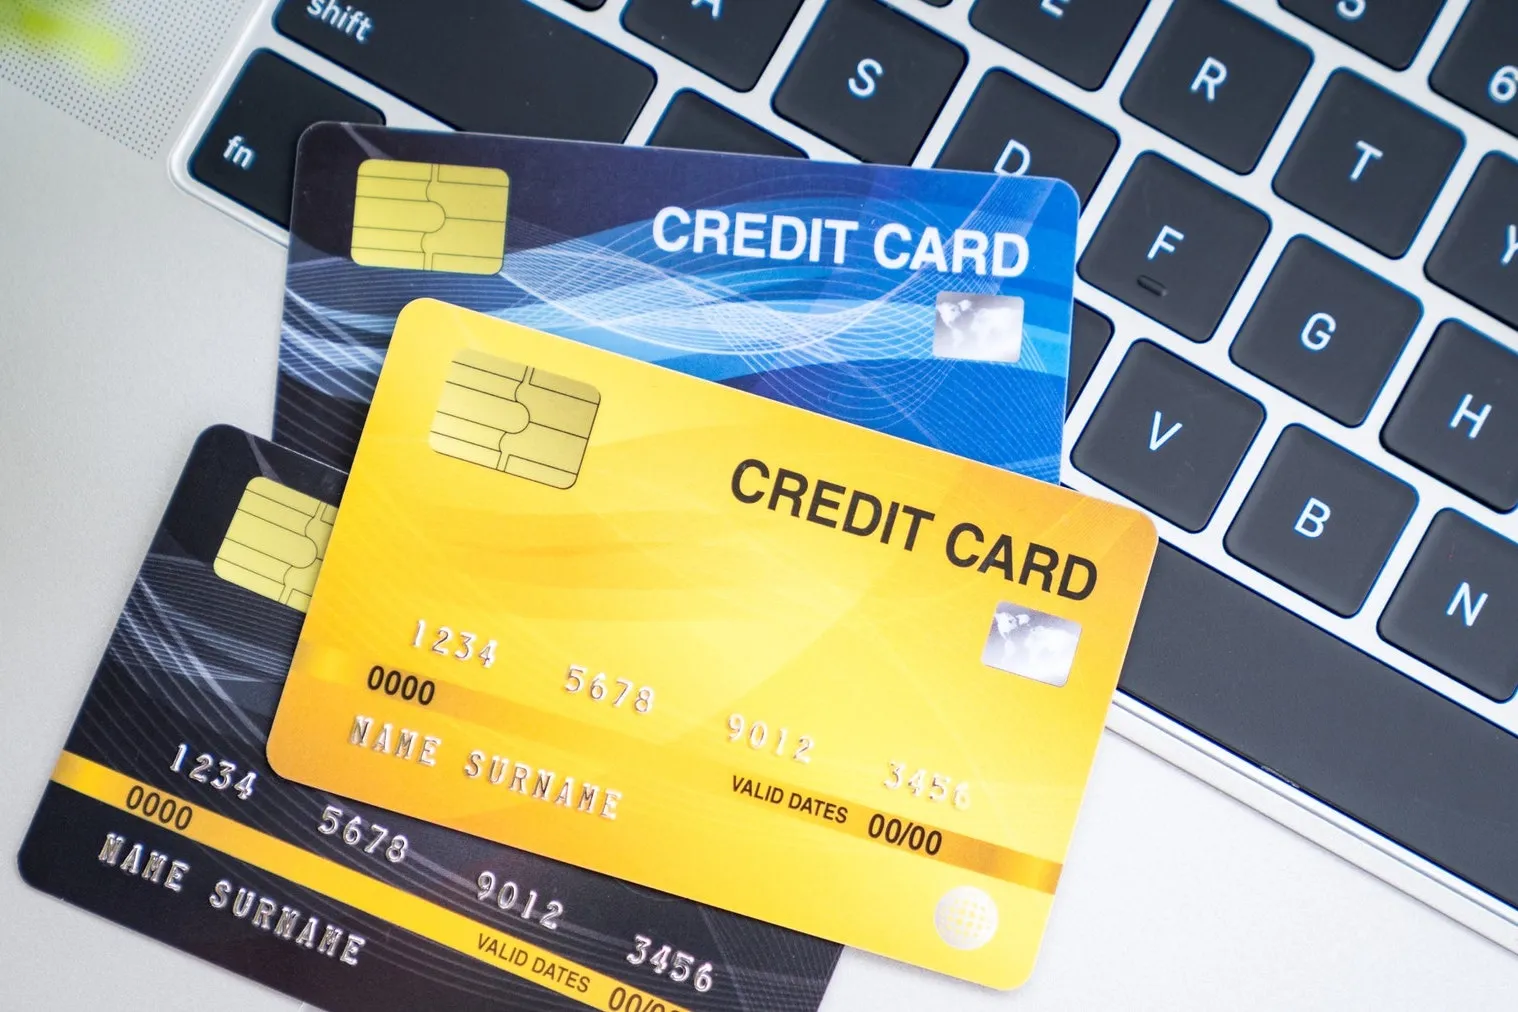 Featured image for “The Basics: An Introduction To Credit Cards”